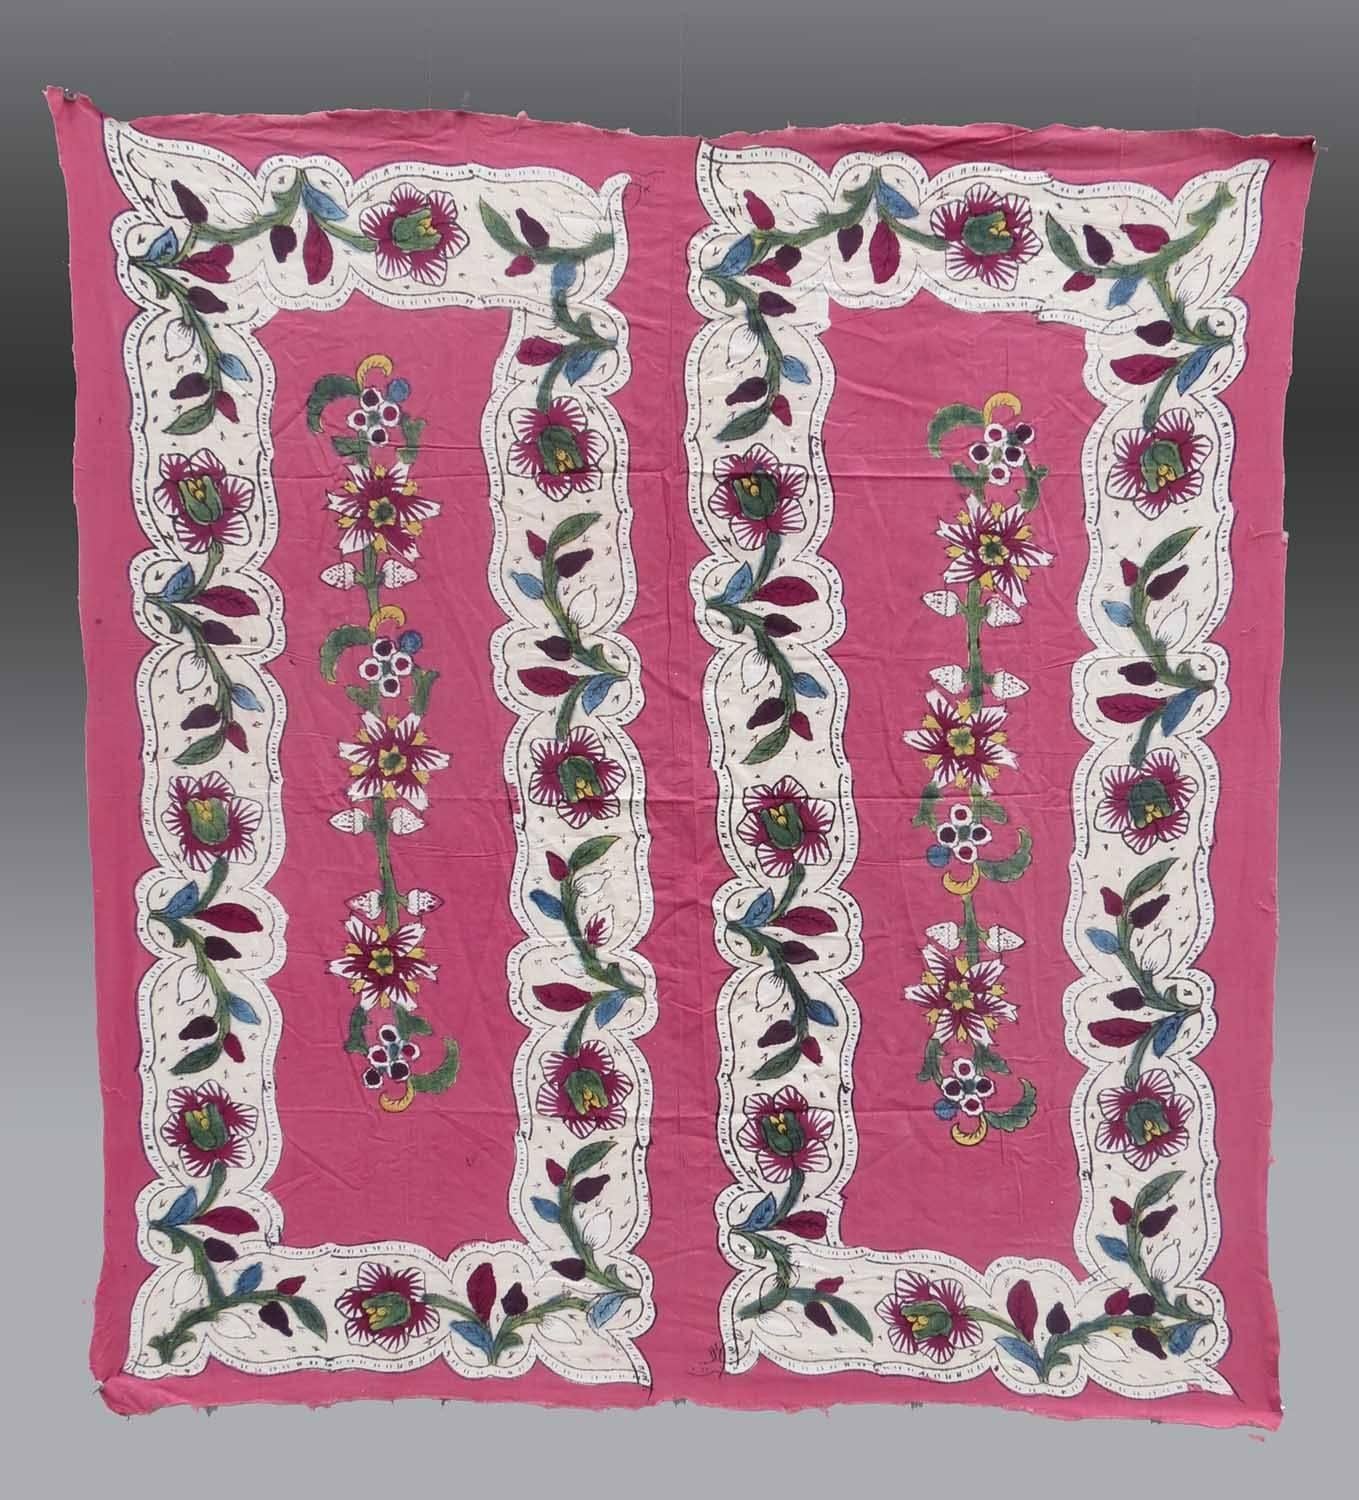 An example of a very artistic but little known textile type from western Anatolia, and the village of Kandili near Istanbul. It dates to the early 20th century, and is in good condition with no holes, stains, or repair (patch). The colors appear to